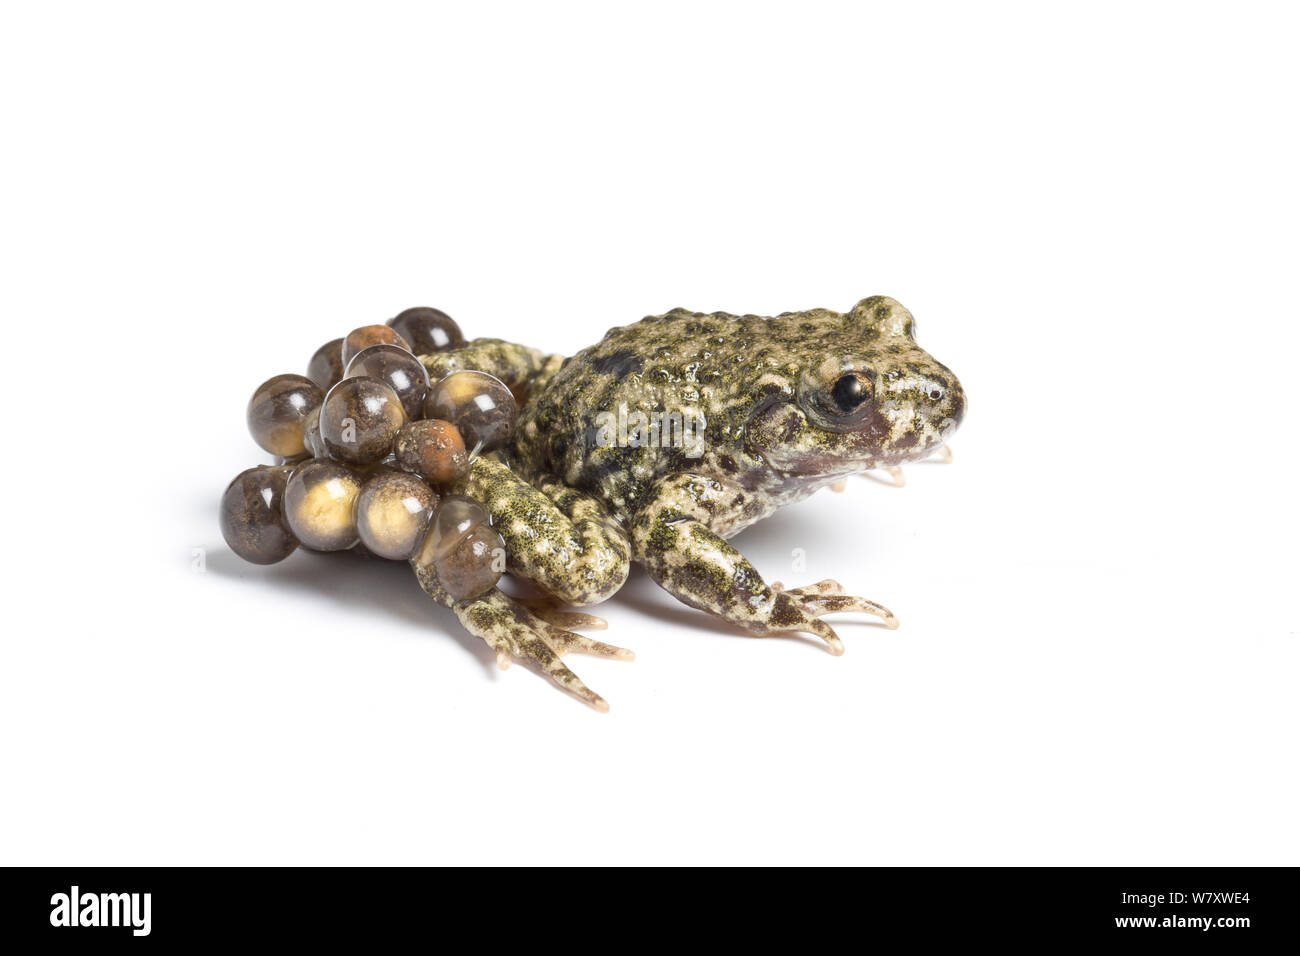 Midwife toad (Alytes obstetricans) male carrying eggs in advanced stage of development, South Yorkshire, UK, June. Introduced species in the UK, occurs in Europe. Stock Photo